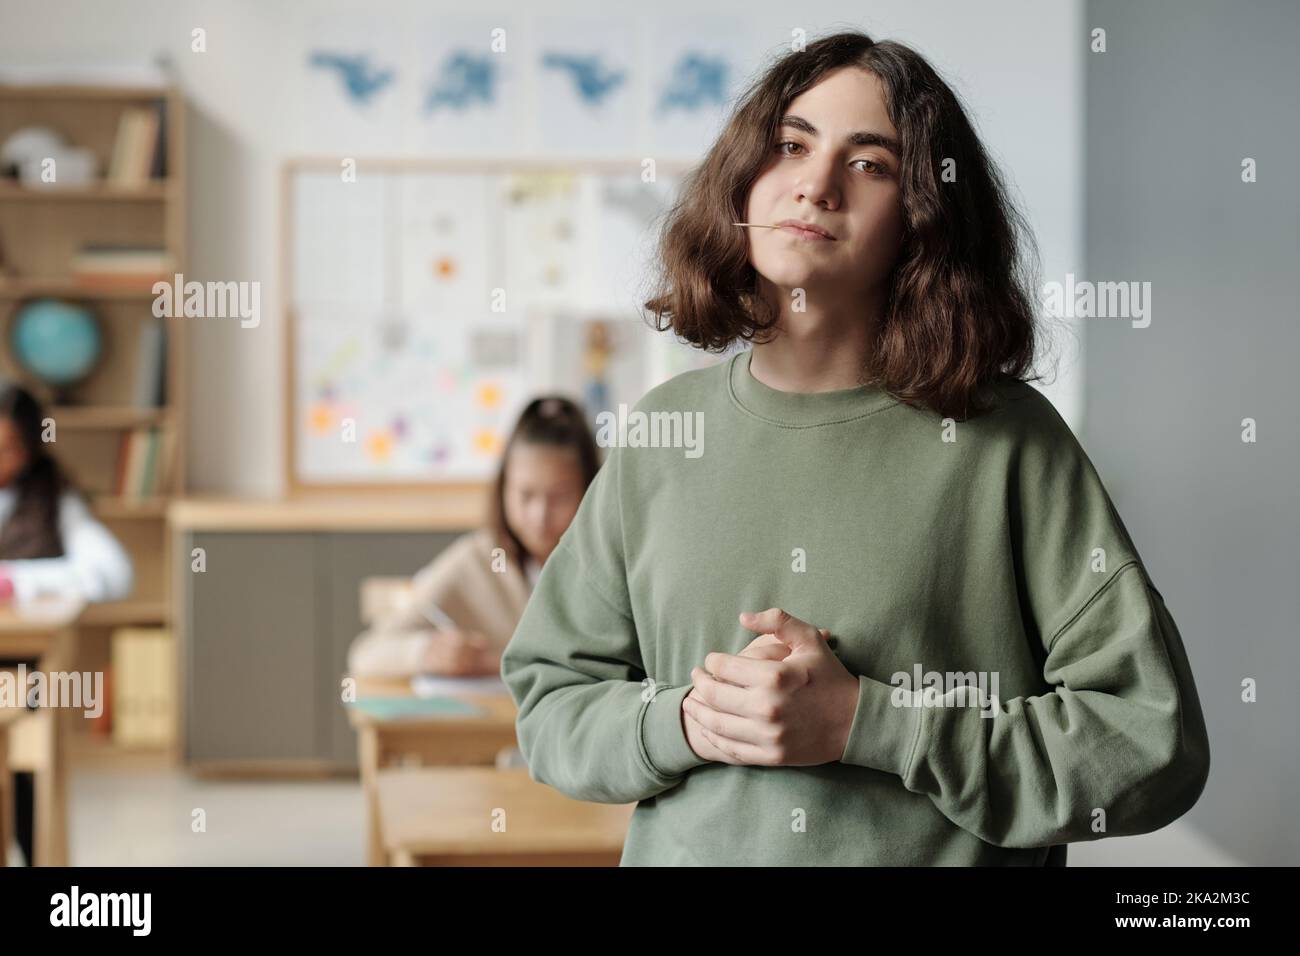 Schoolchildren Cruel Boys Filming On The Phone Torturing Bullying Their  Classmate In School Hall Puberty Difficult Age Stock Photo - Download Image  Now - iStock